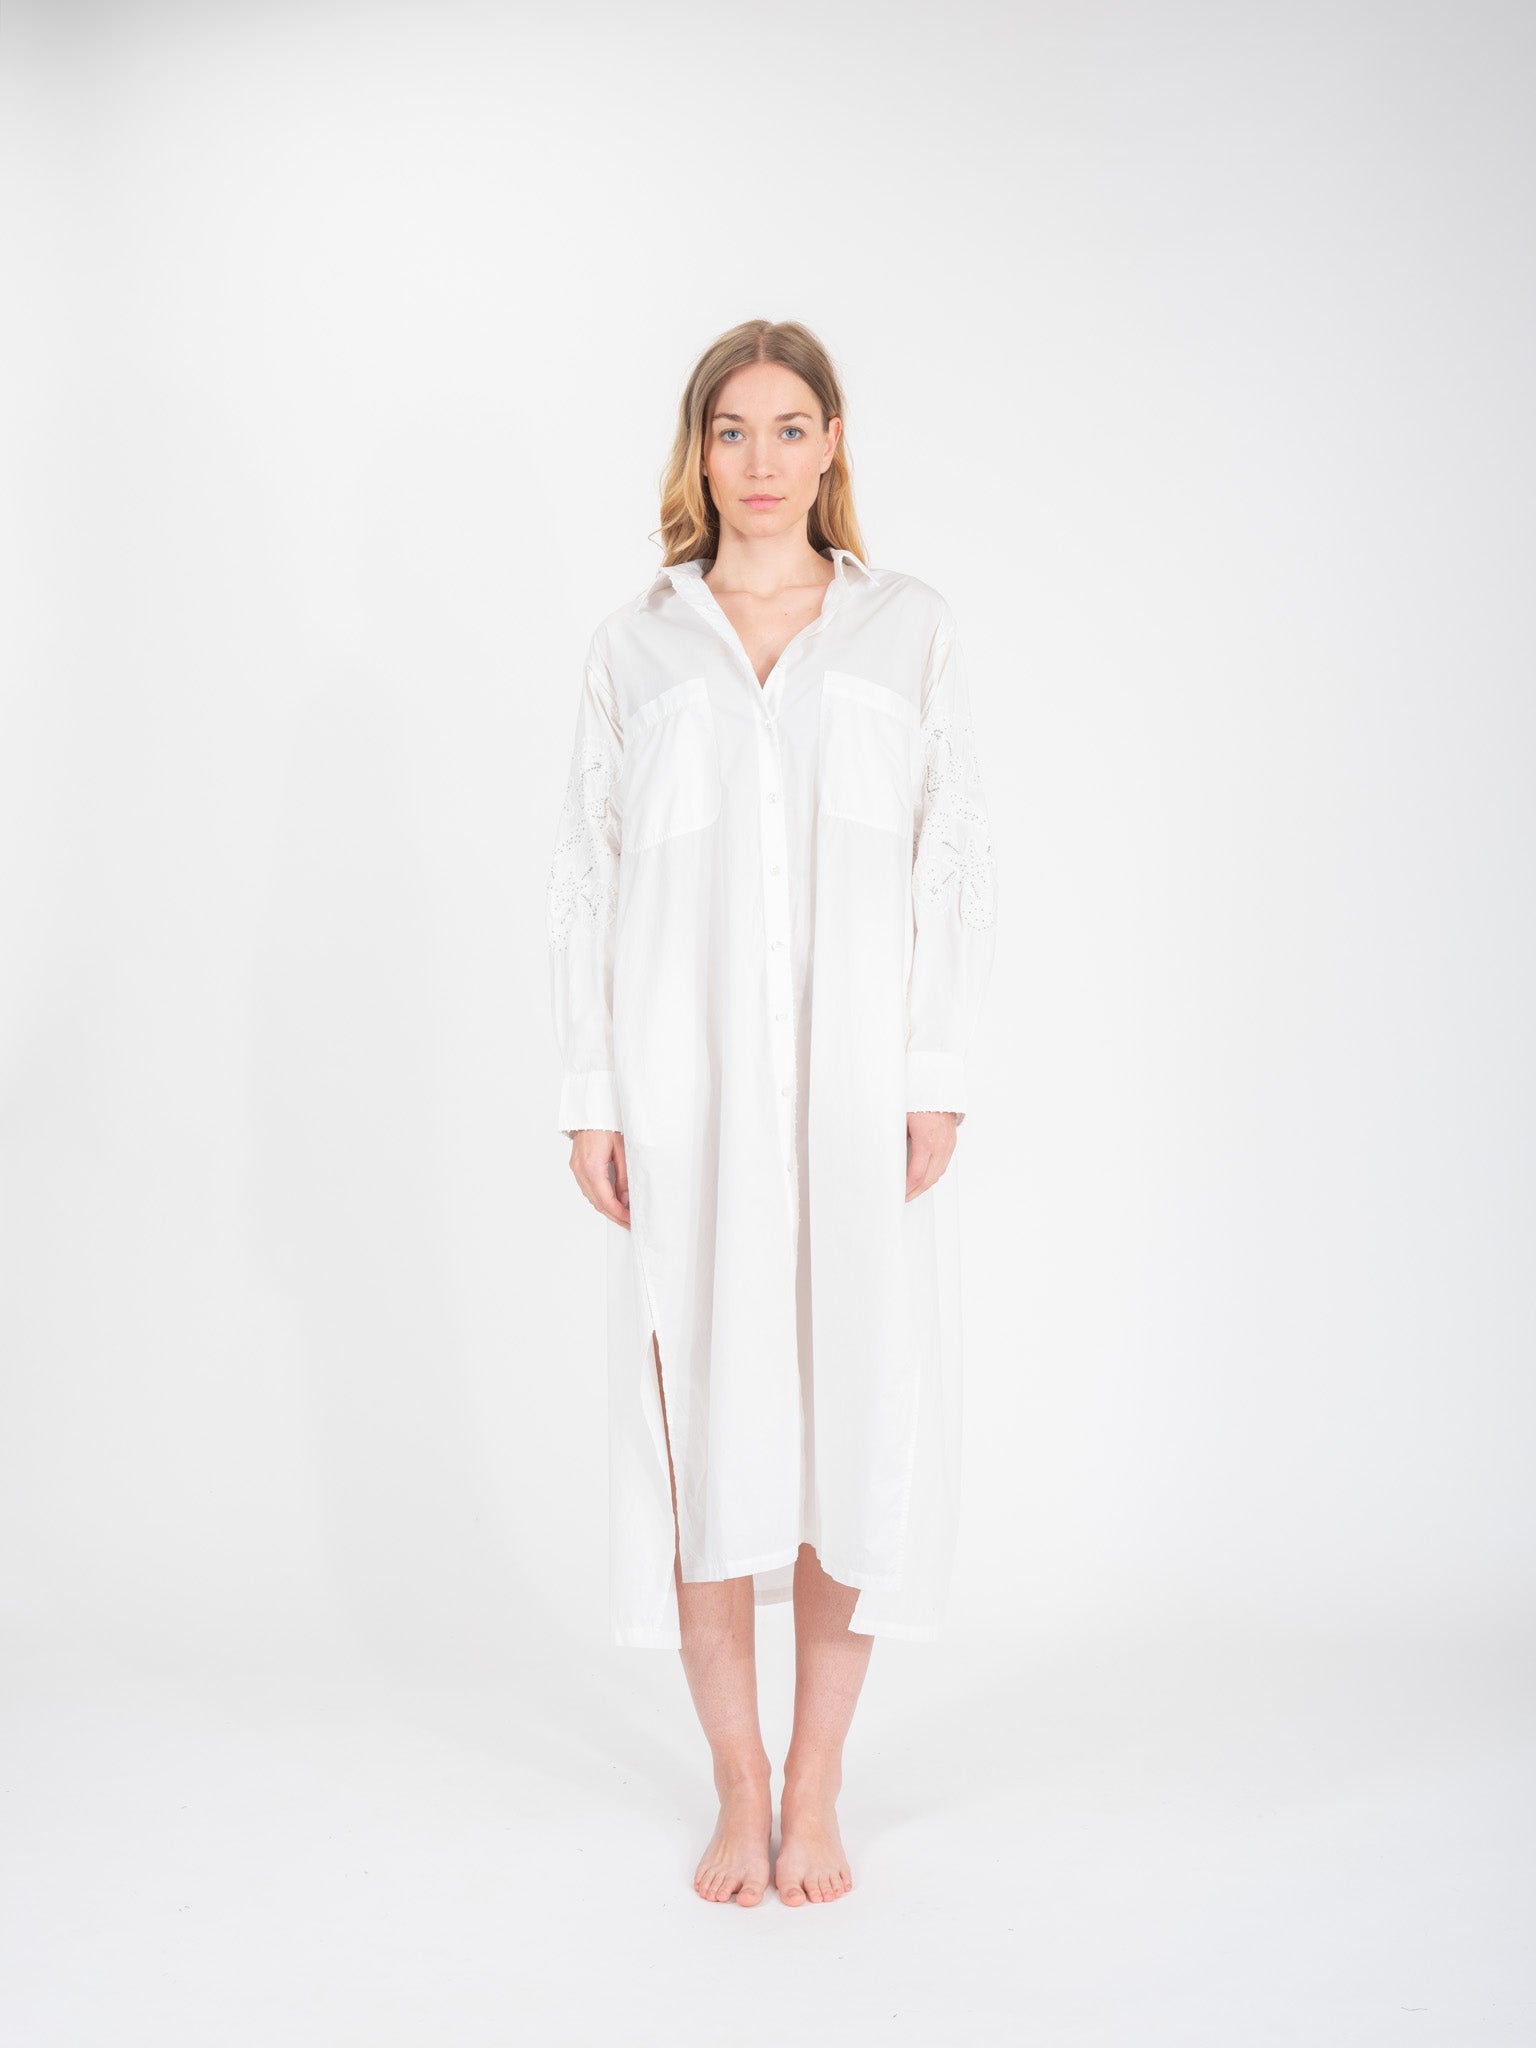 Robe longue blanche brodée coquillage Ogaan